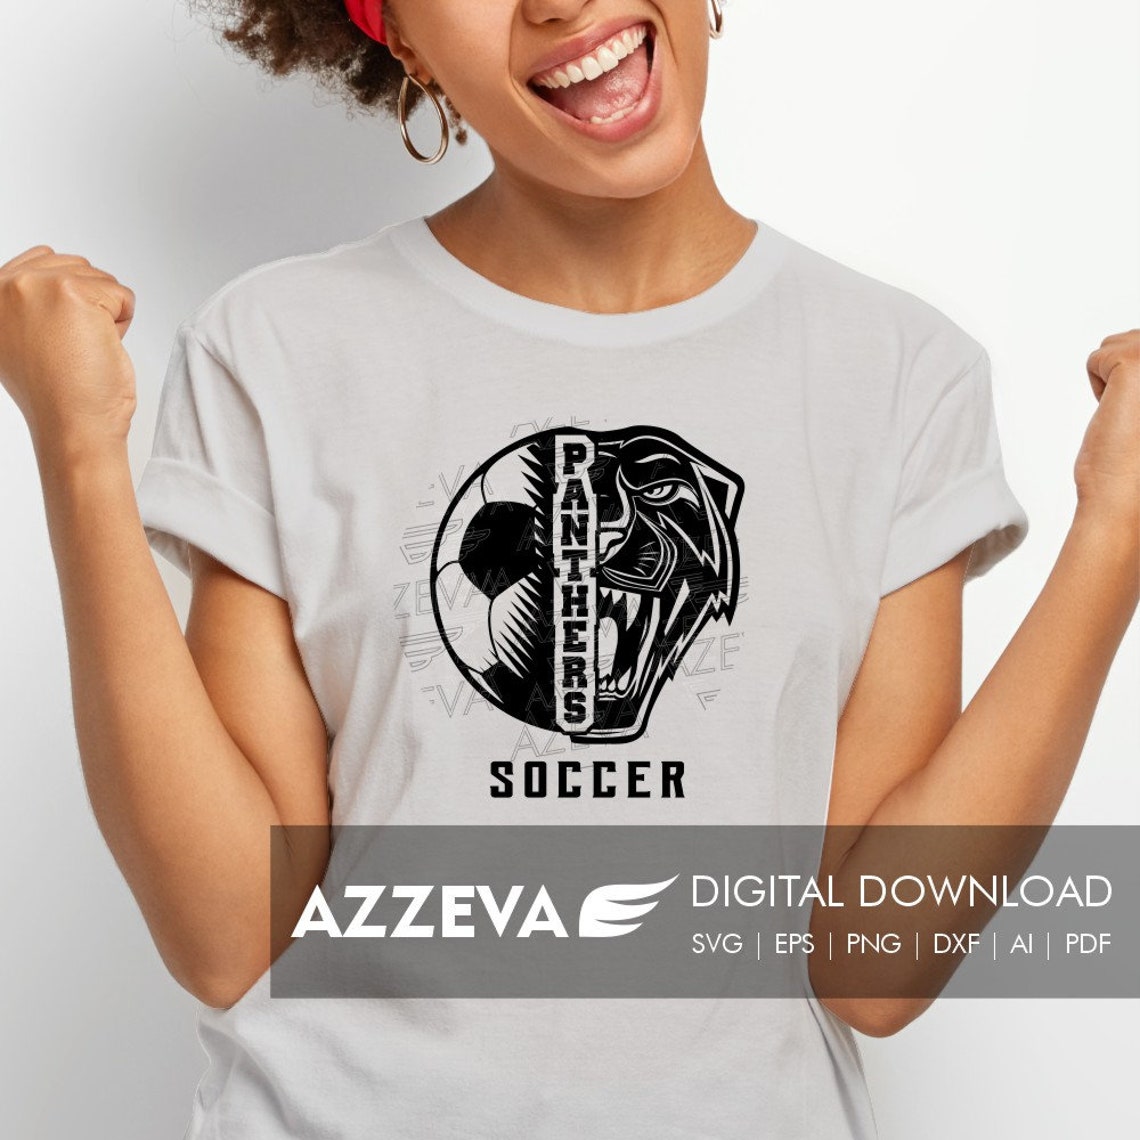 Panthers Soccer Design Png Eps Ai Dxf Png Pdf Jpg and - Etsy